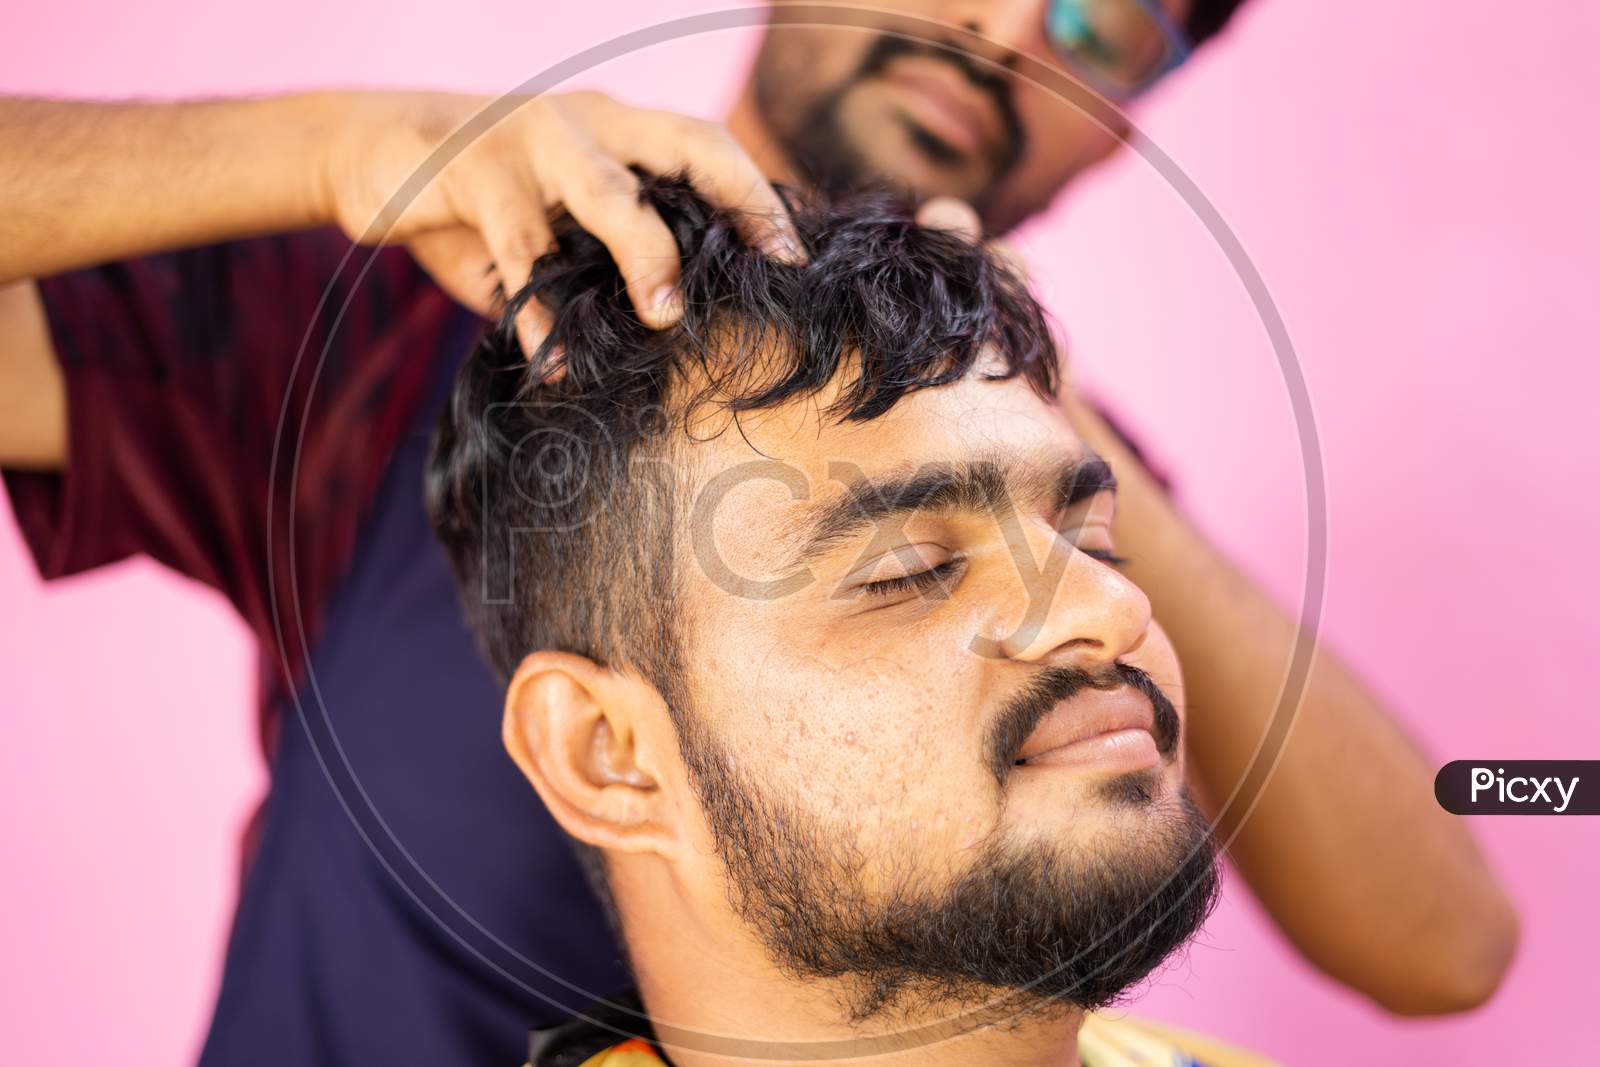 Customer At Barber Shop Enjoying Head Massage From Barber - Concept Of Relaxation And Alternative Health Treatment